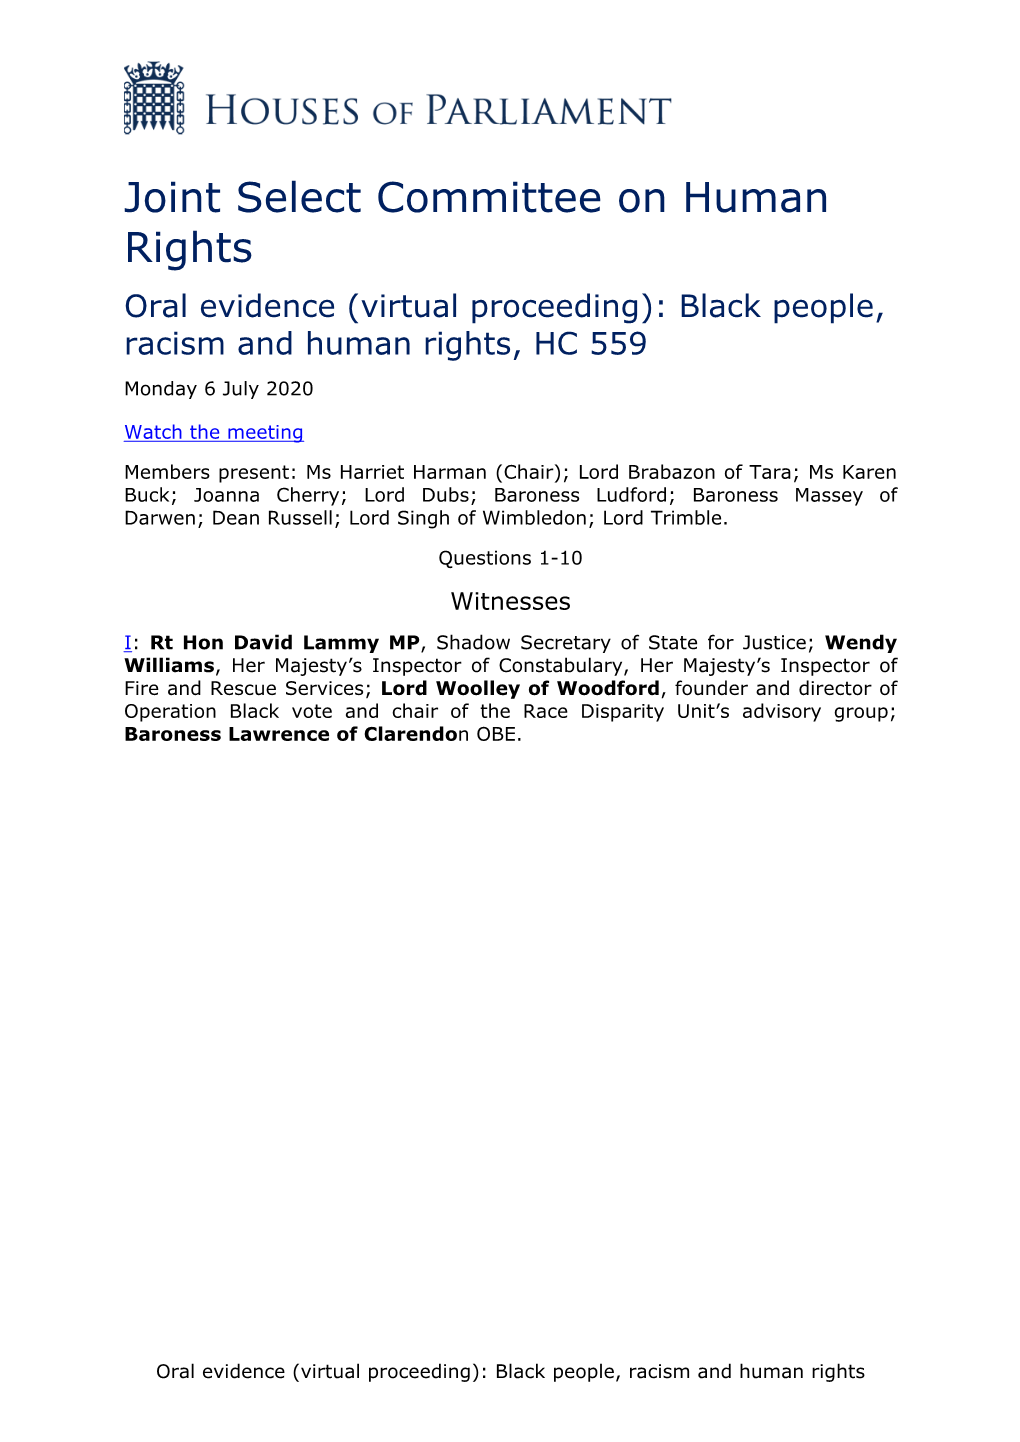 Oral Evidence (Virtual Proceeding): Black People, Racism and Human Rights, HC 559